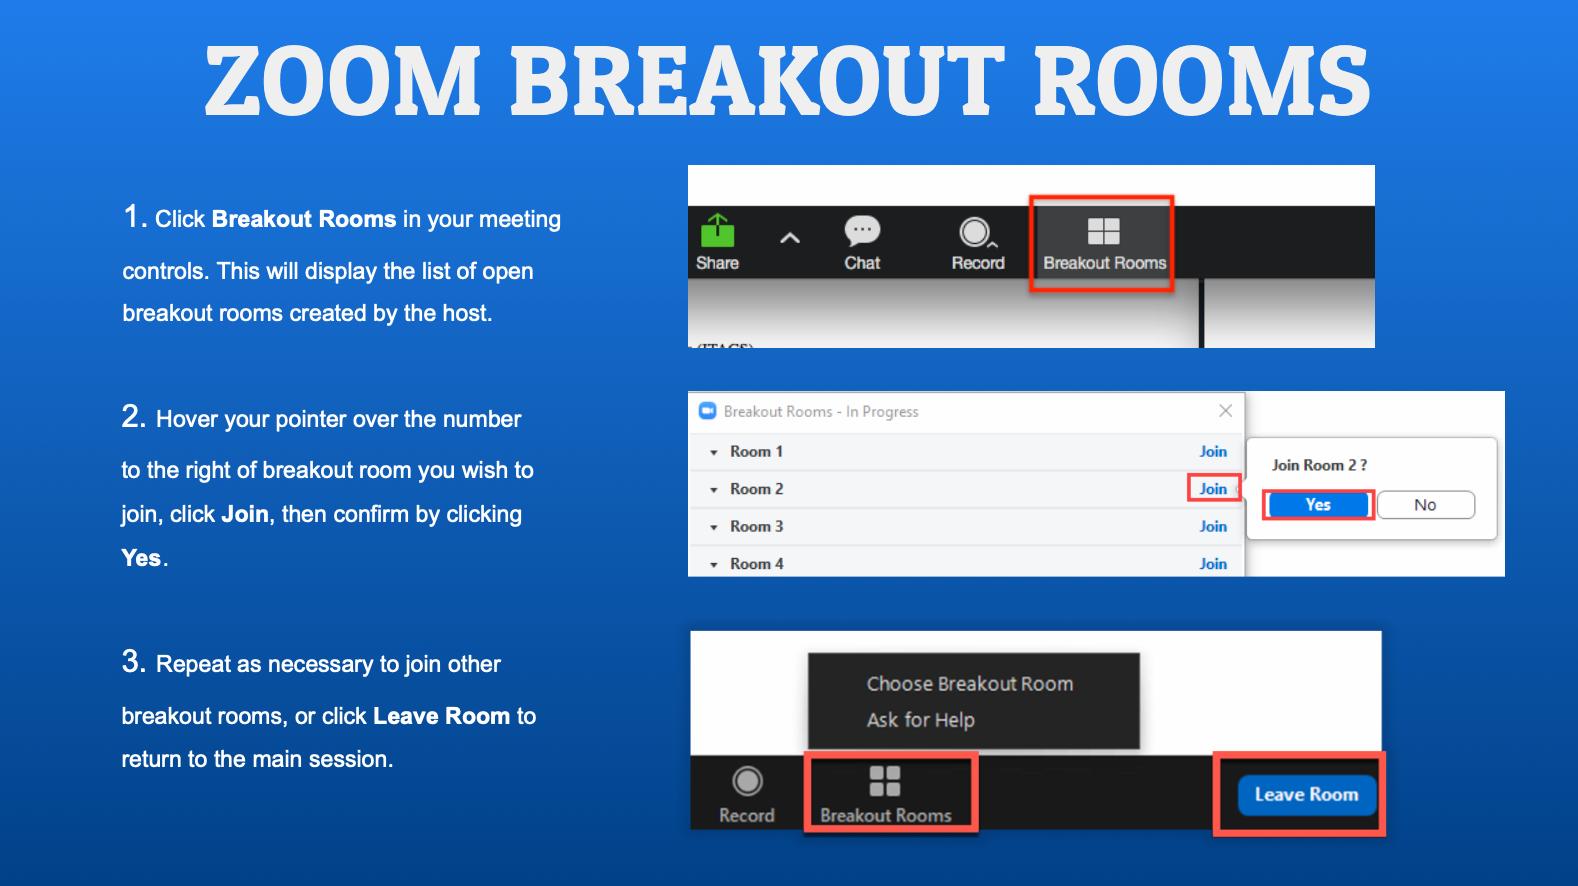 Zoom Breakout Rooms instructions: click Breakout Rooms in meeting controls, select the room and click join. 